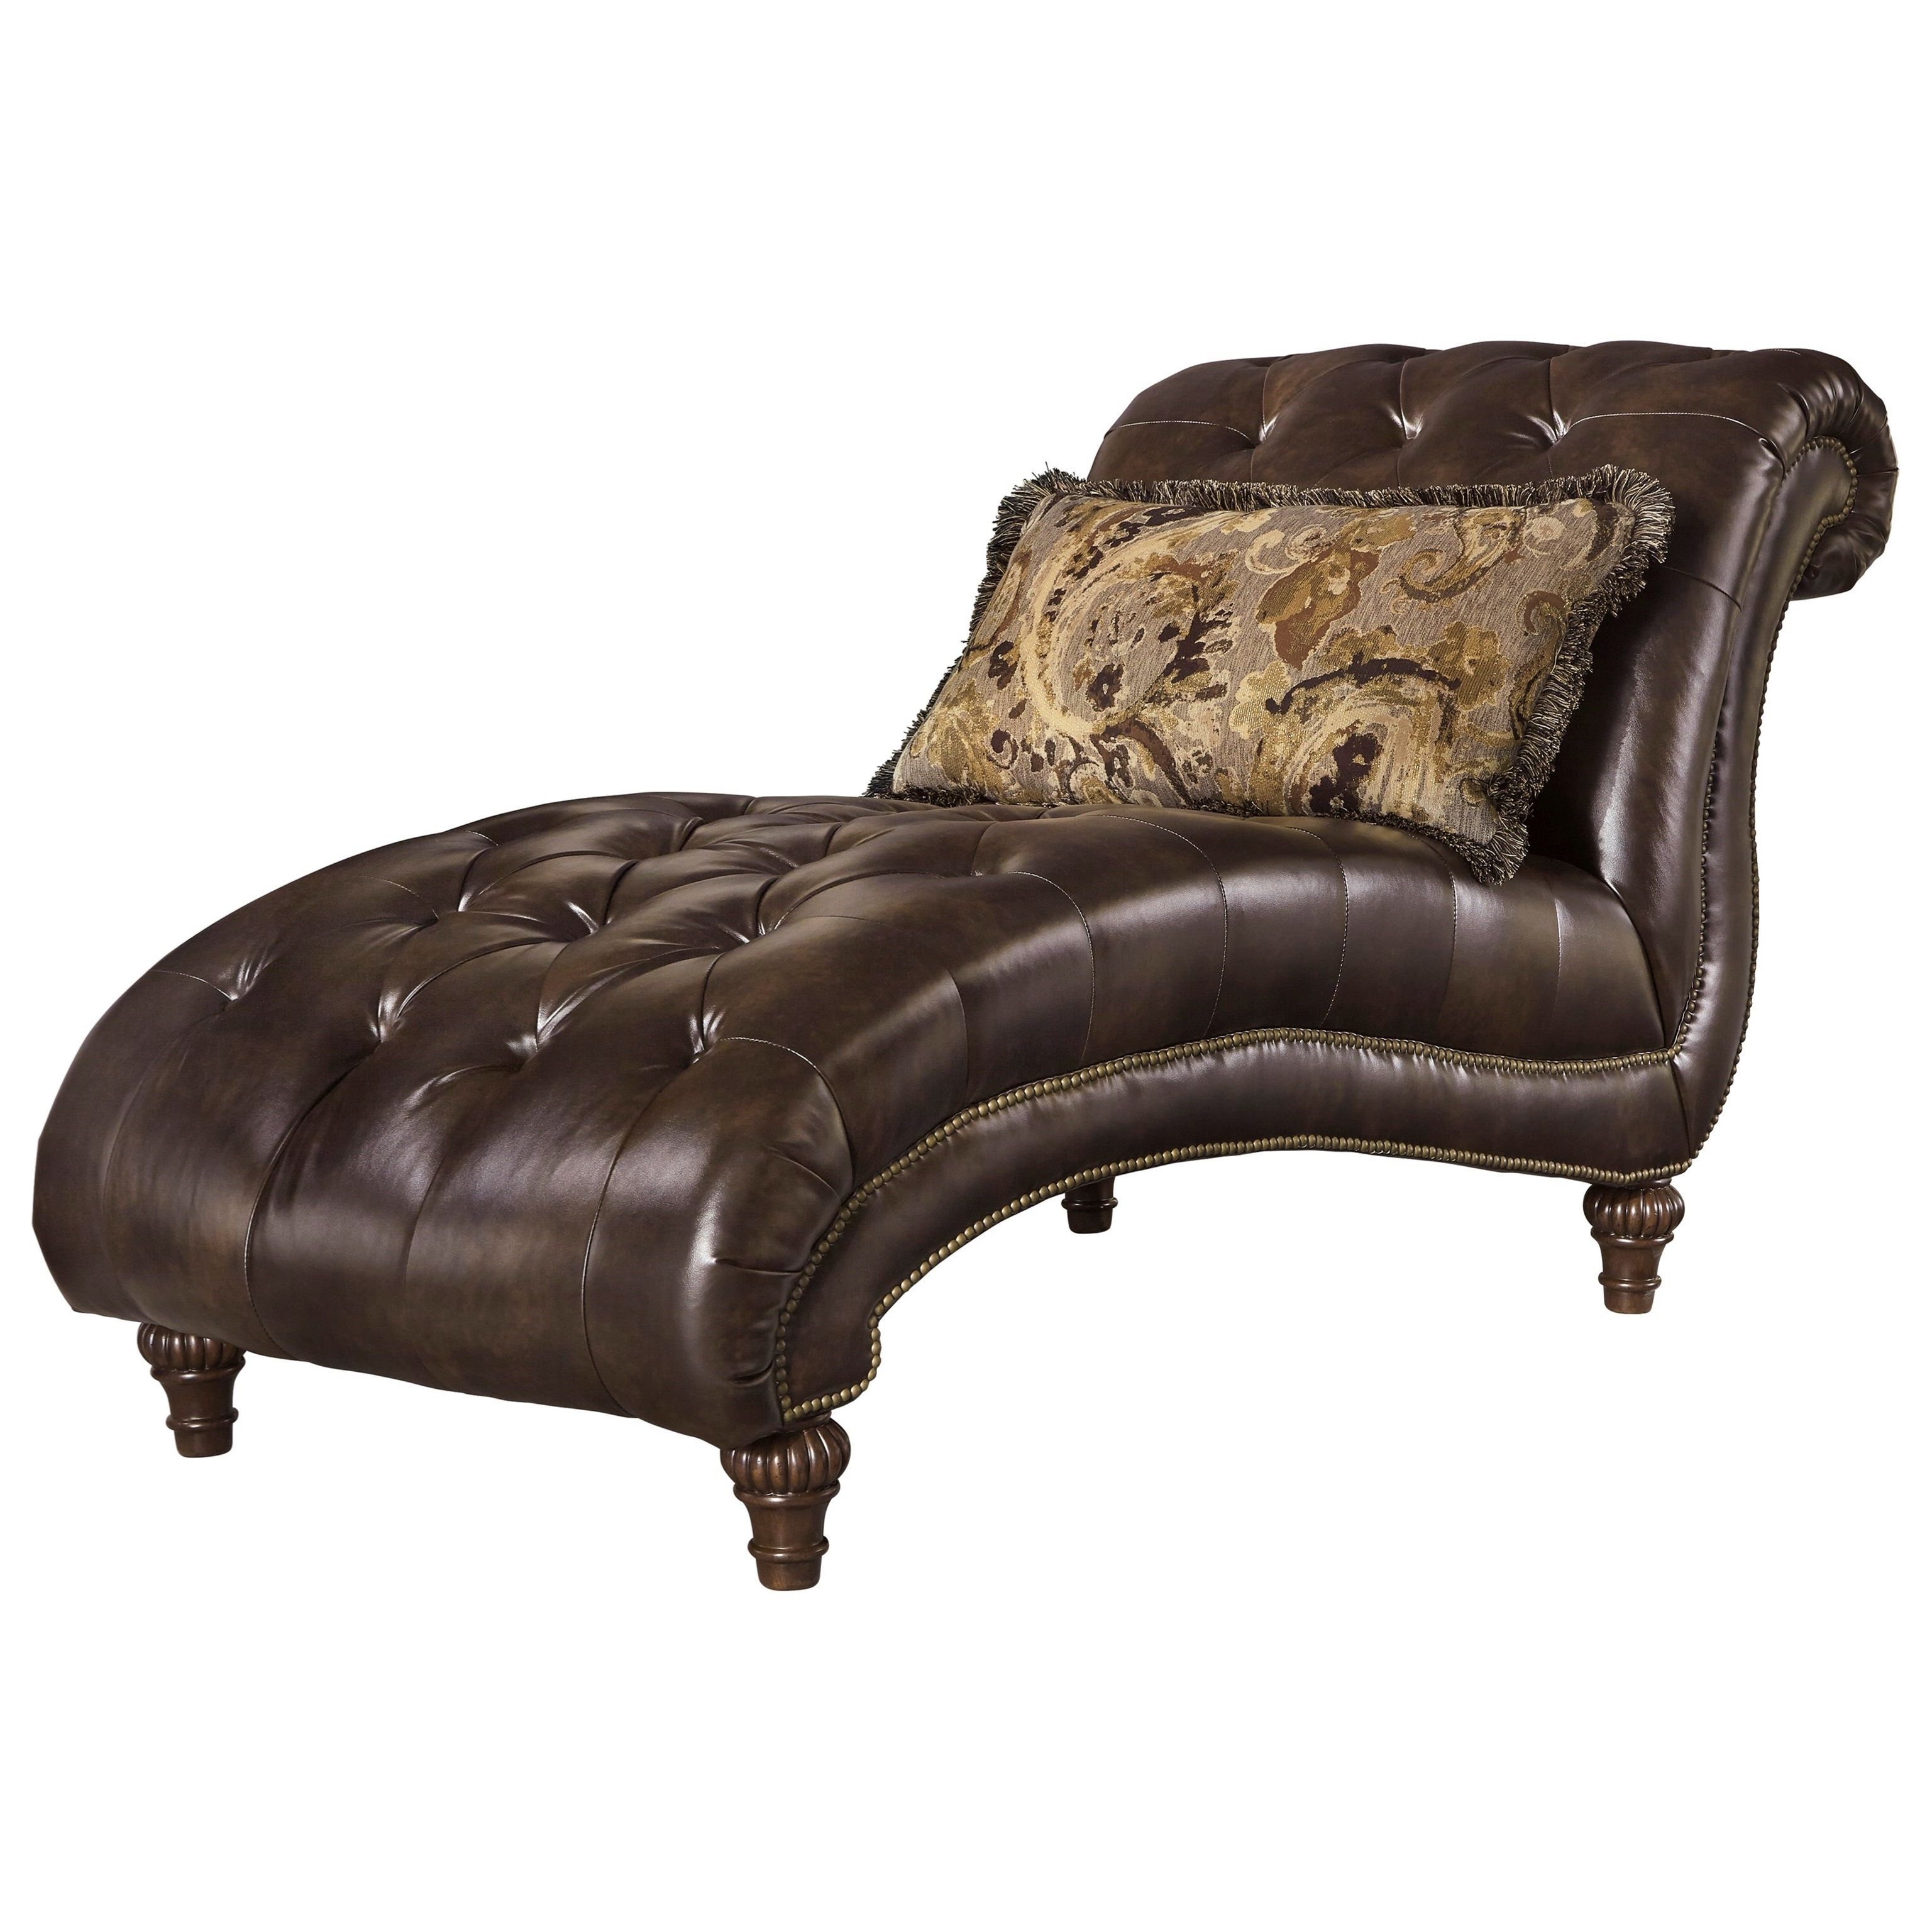 Signature Designashley Winnsboro Durablend Traditional Tufted For Most Popular Ashley Chaise Lounges (View 9 of 15)